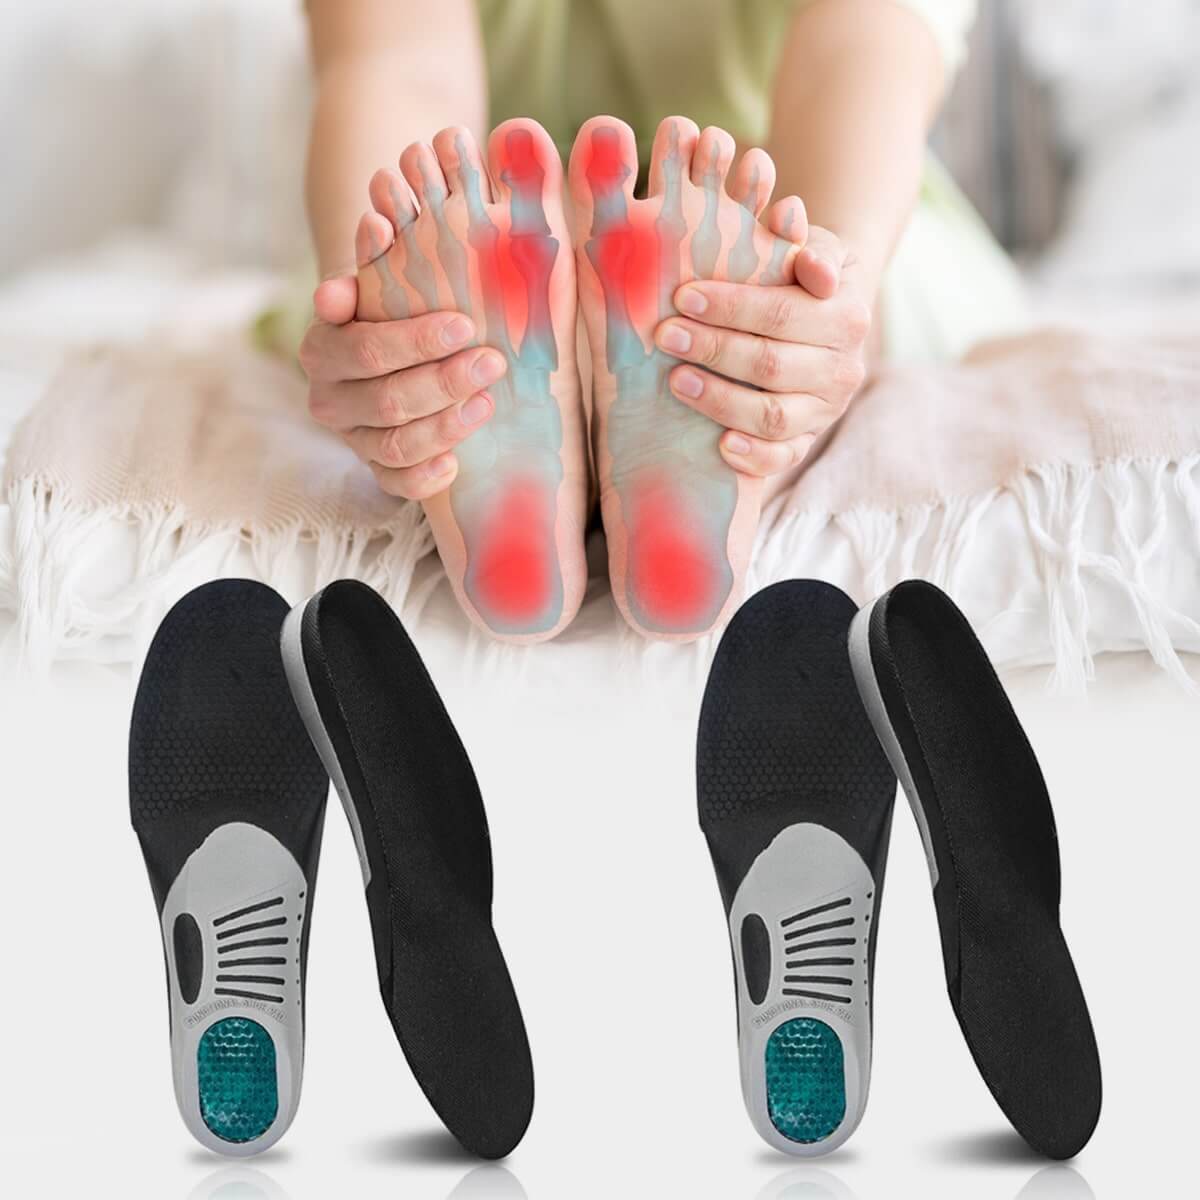 SoleRelief™ Comfortable Orthopedic Insoles for Pain Relief, Plantar Fasciitis, Flat Feet and Arch Support